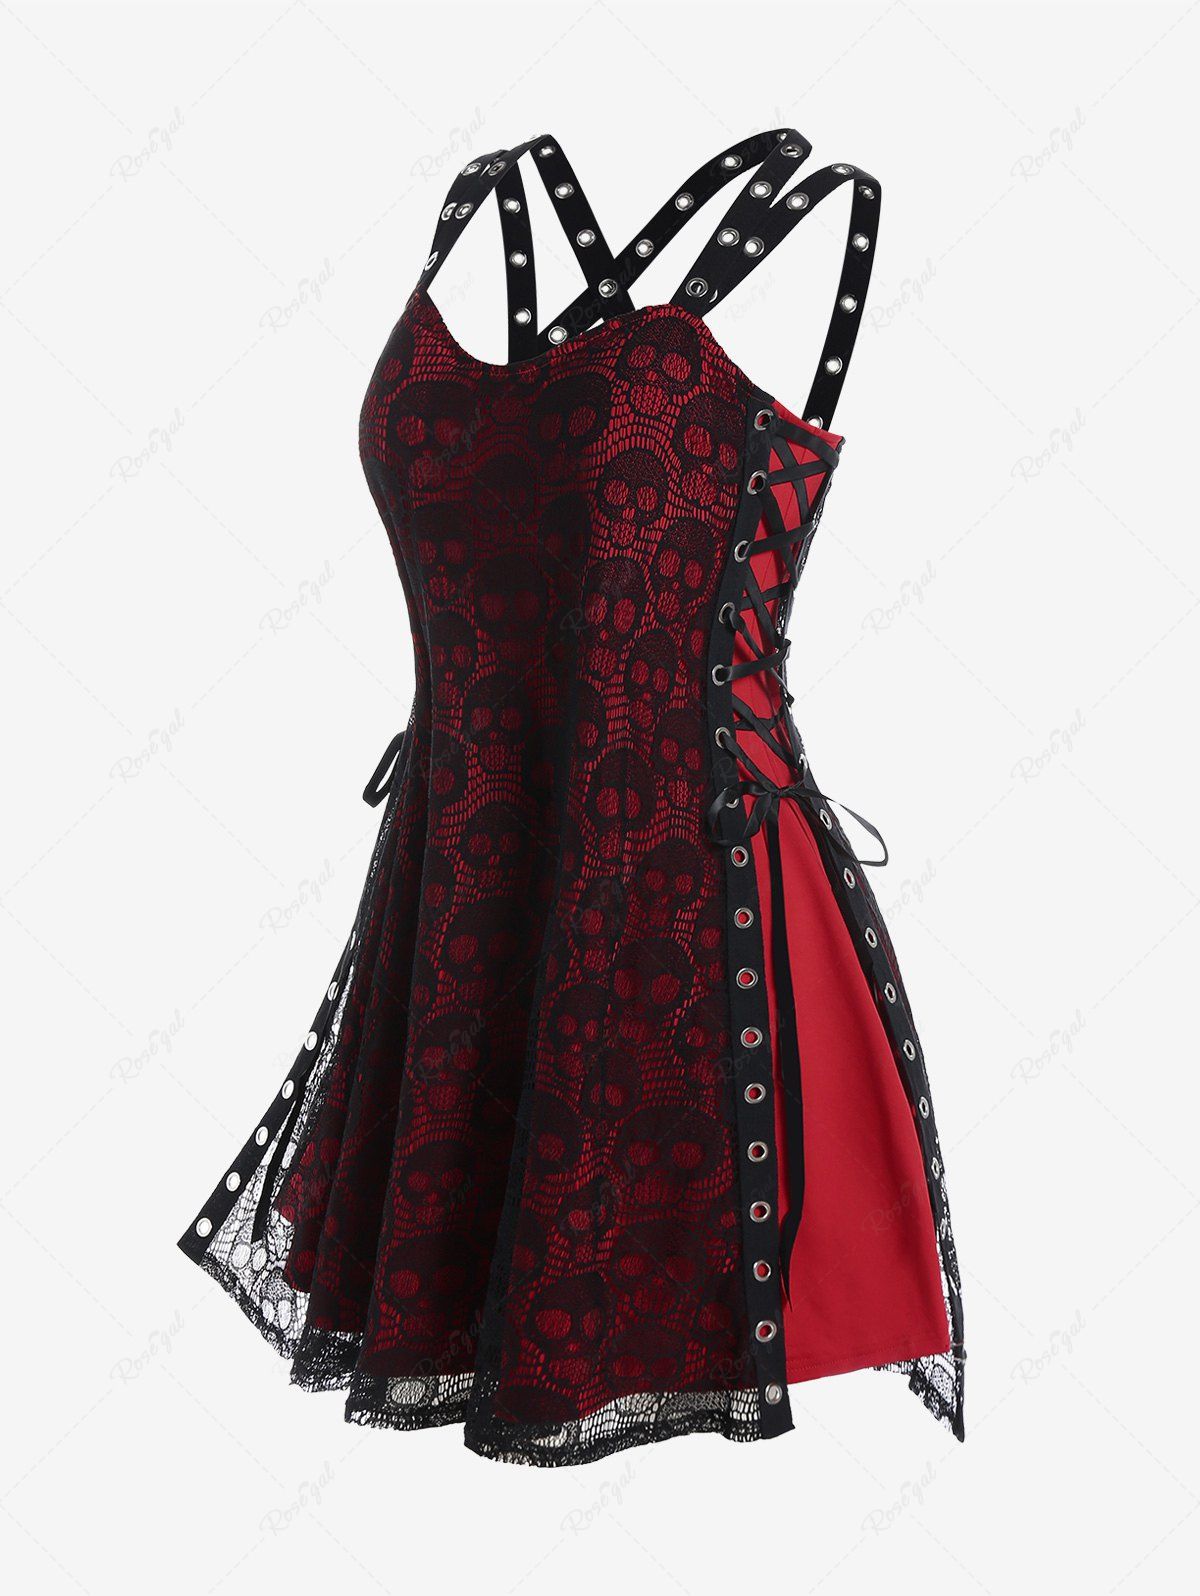 New Gothic Skull Lace Grommets Crisscross Lace-up Dress  